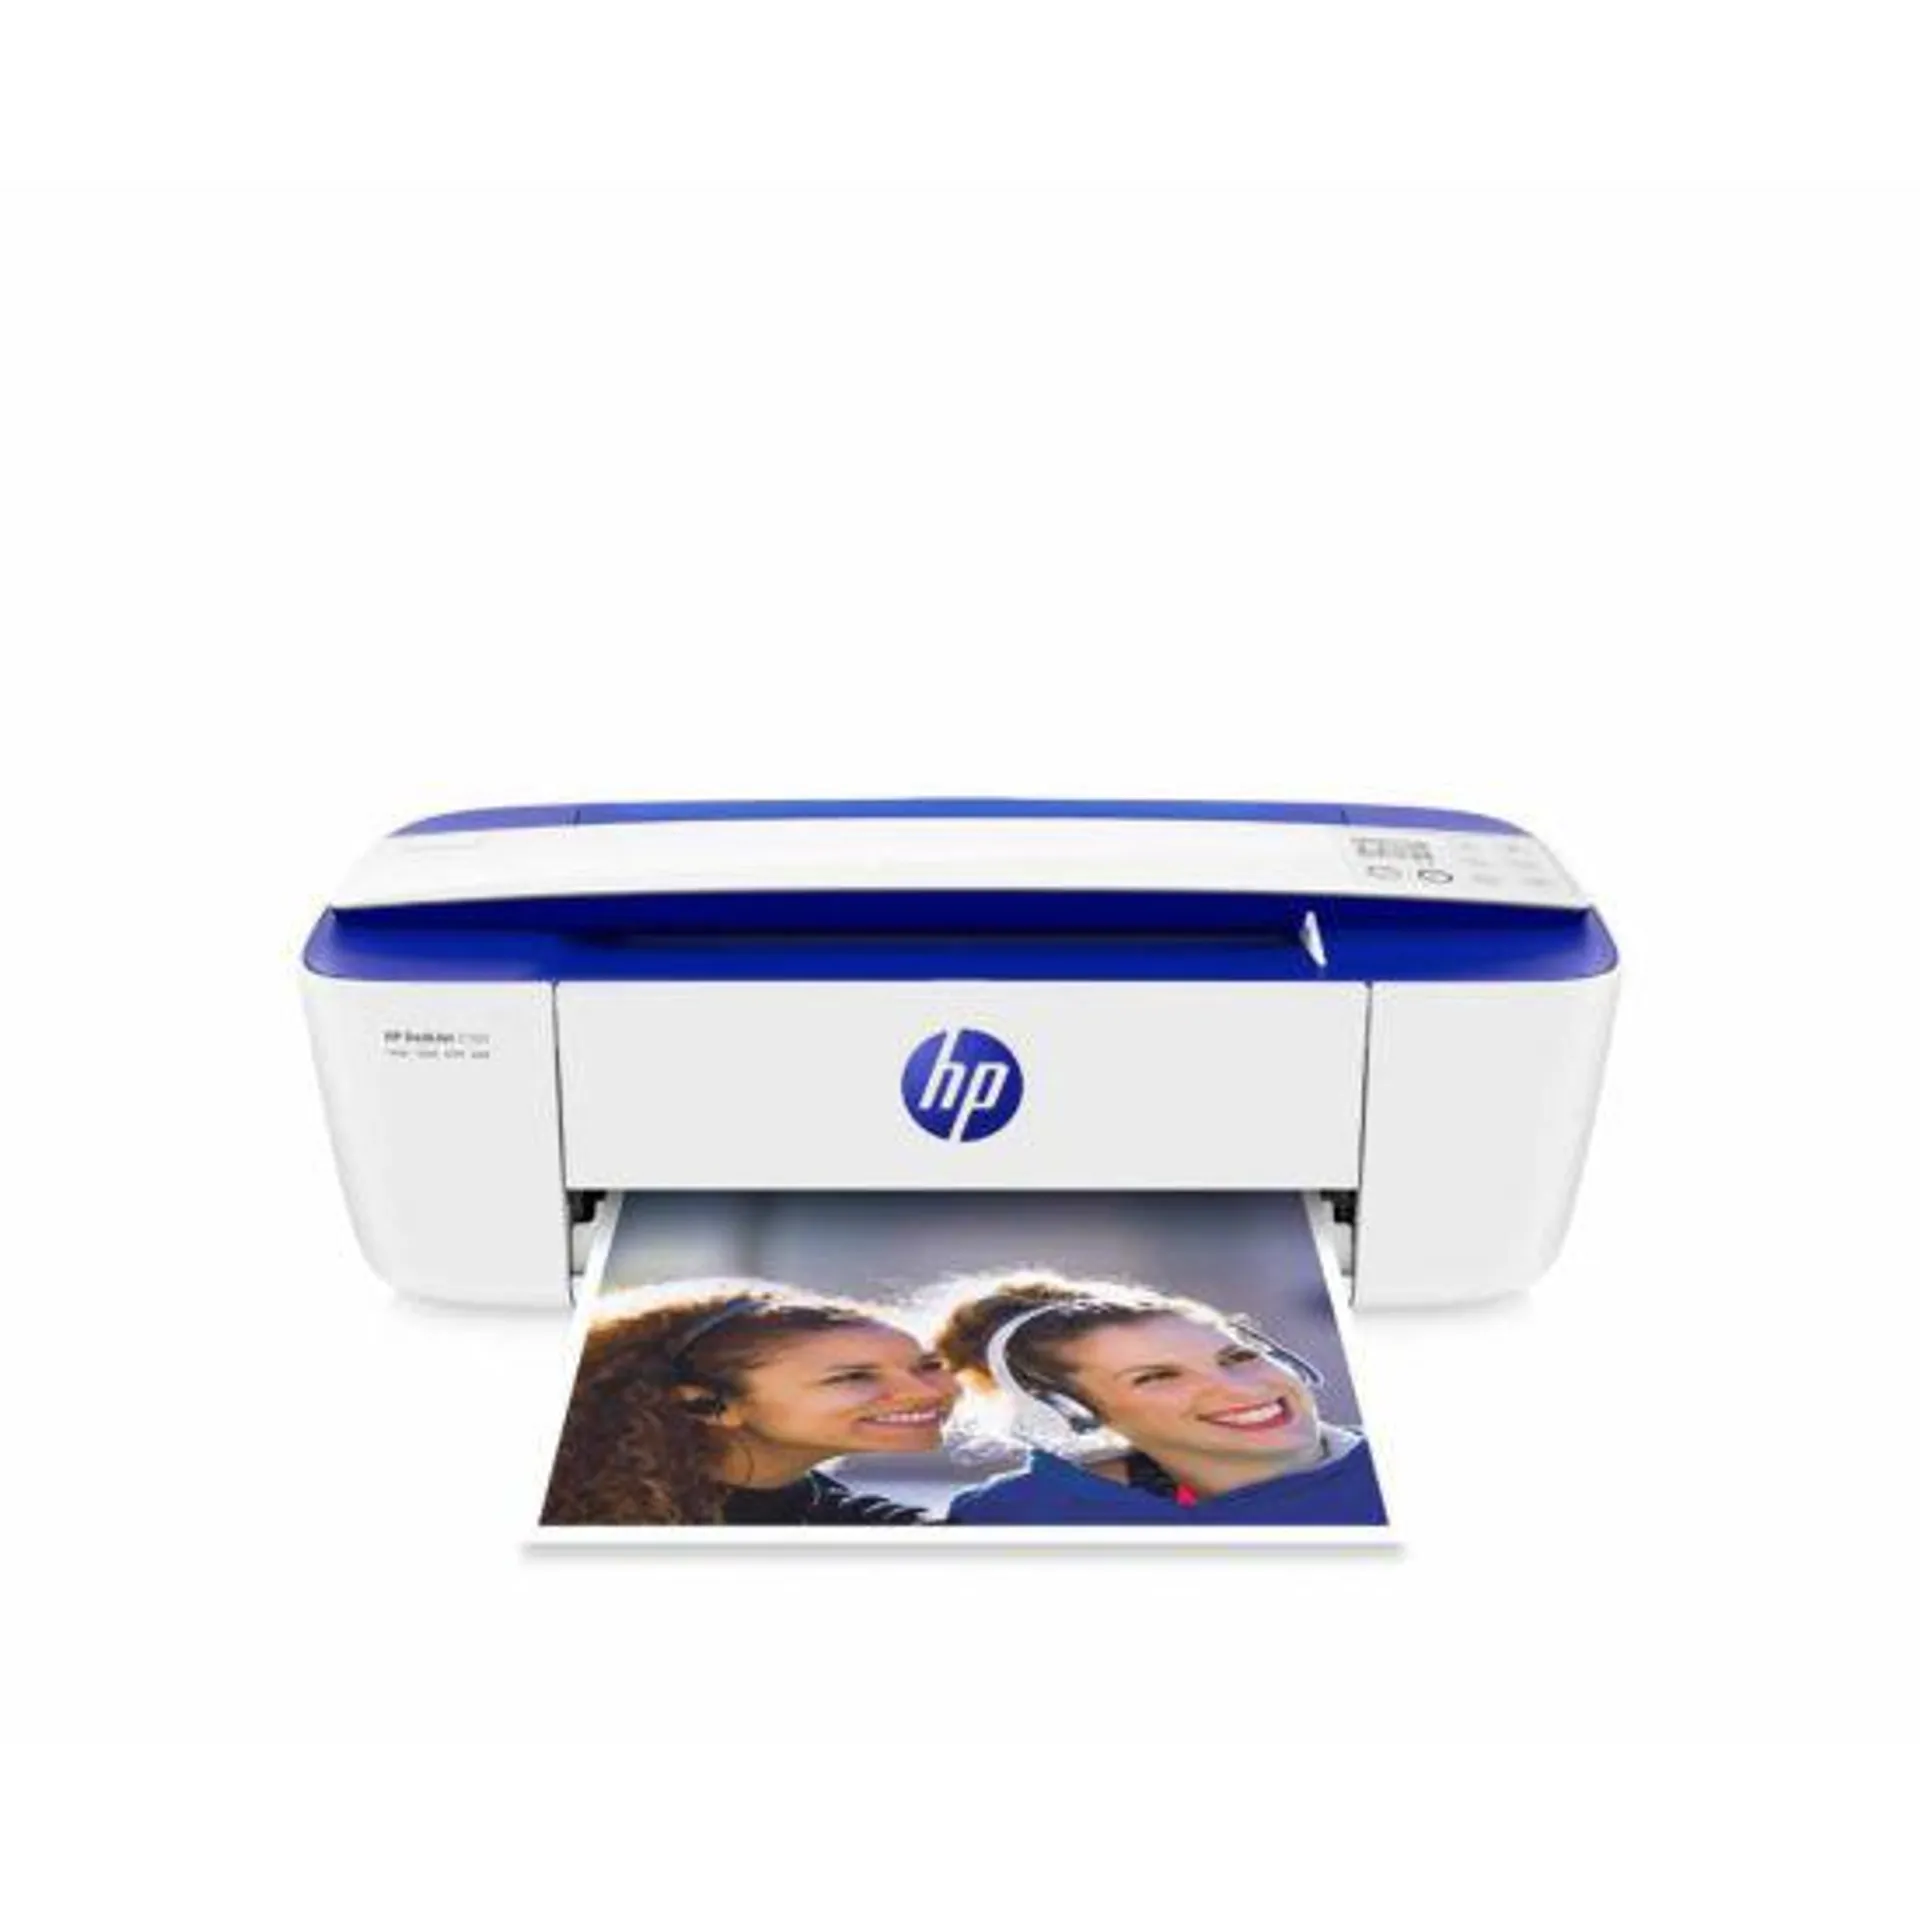 HP Deskjet 3760 Wireless All in One Inkjet Printer with Free 2 Month Instant Ink Trial